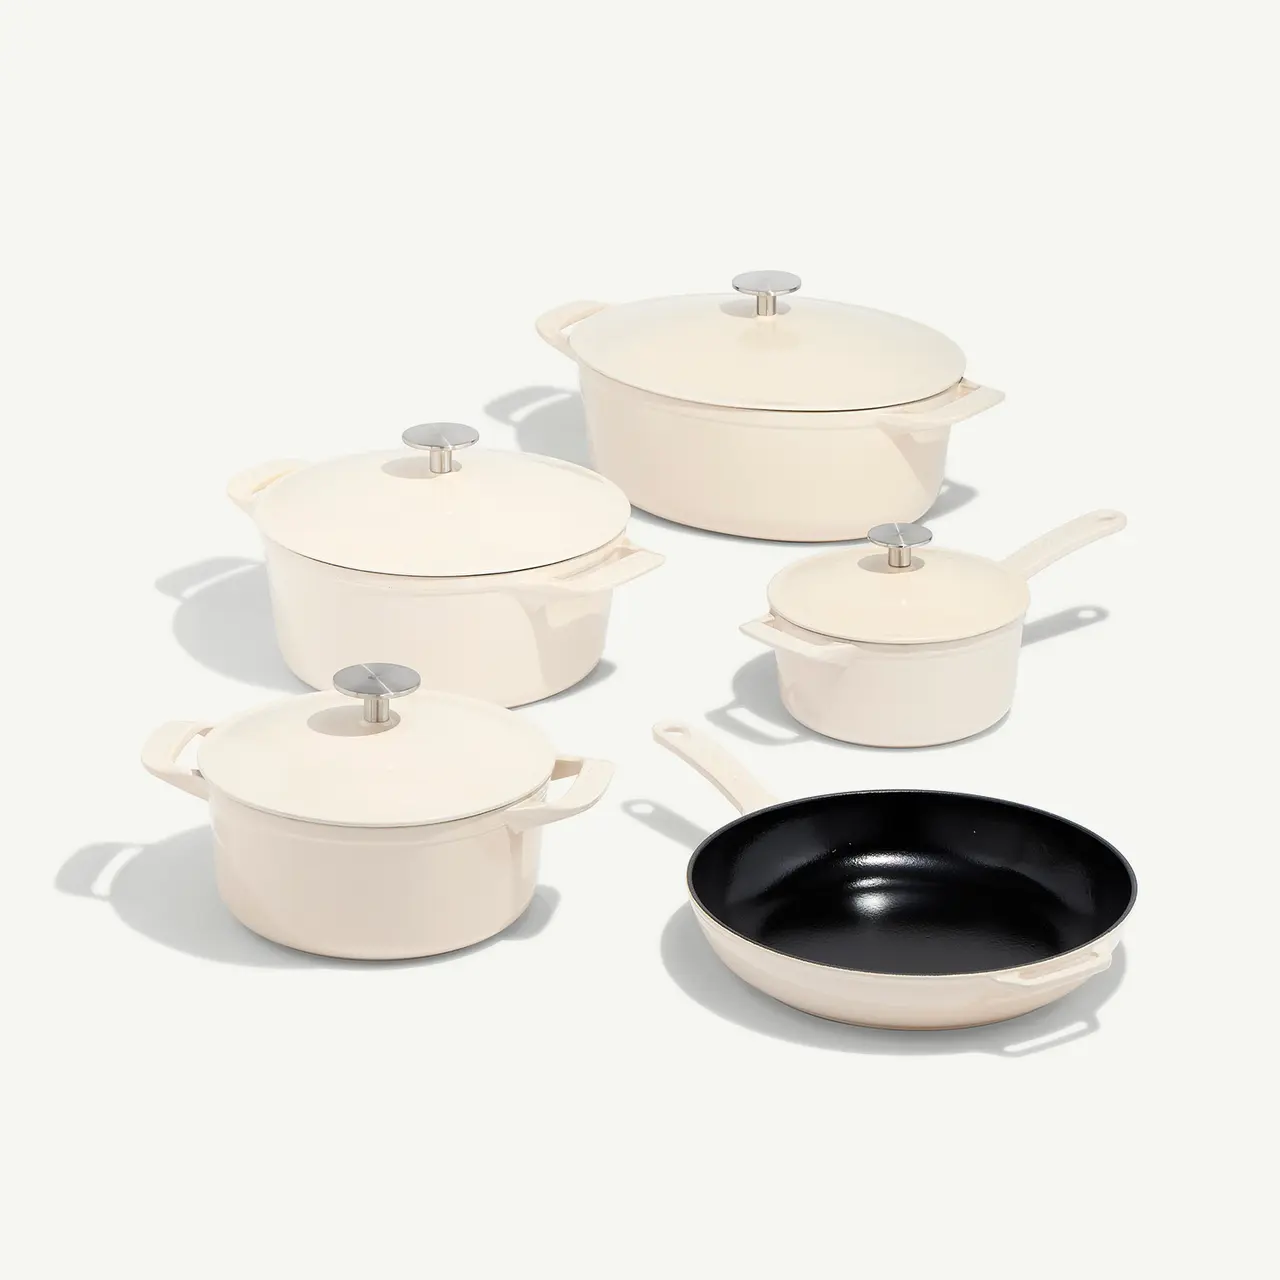 A set of elegant white cookware with a single black skillet, each piece featuring matching lids and handles, displayed on a light background.